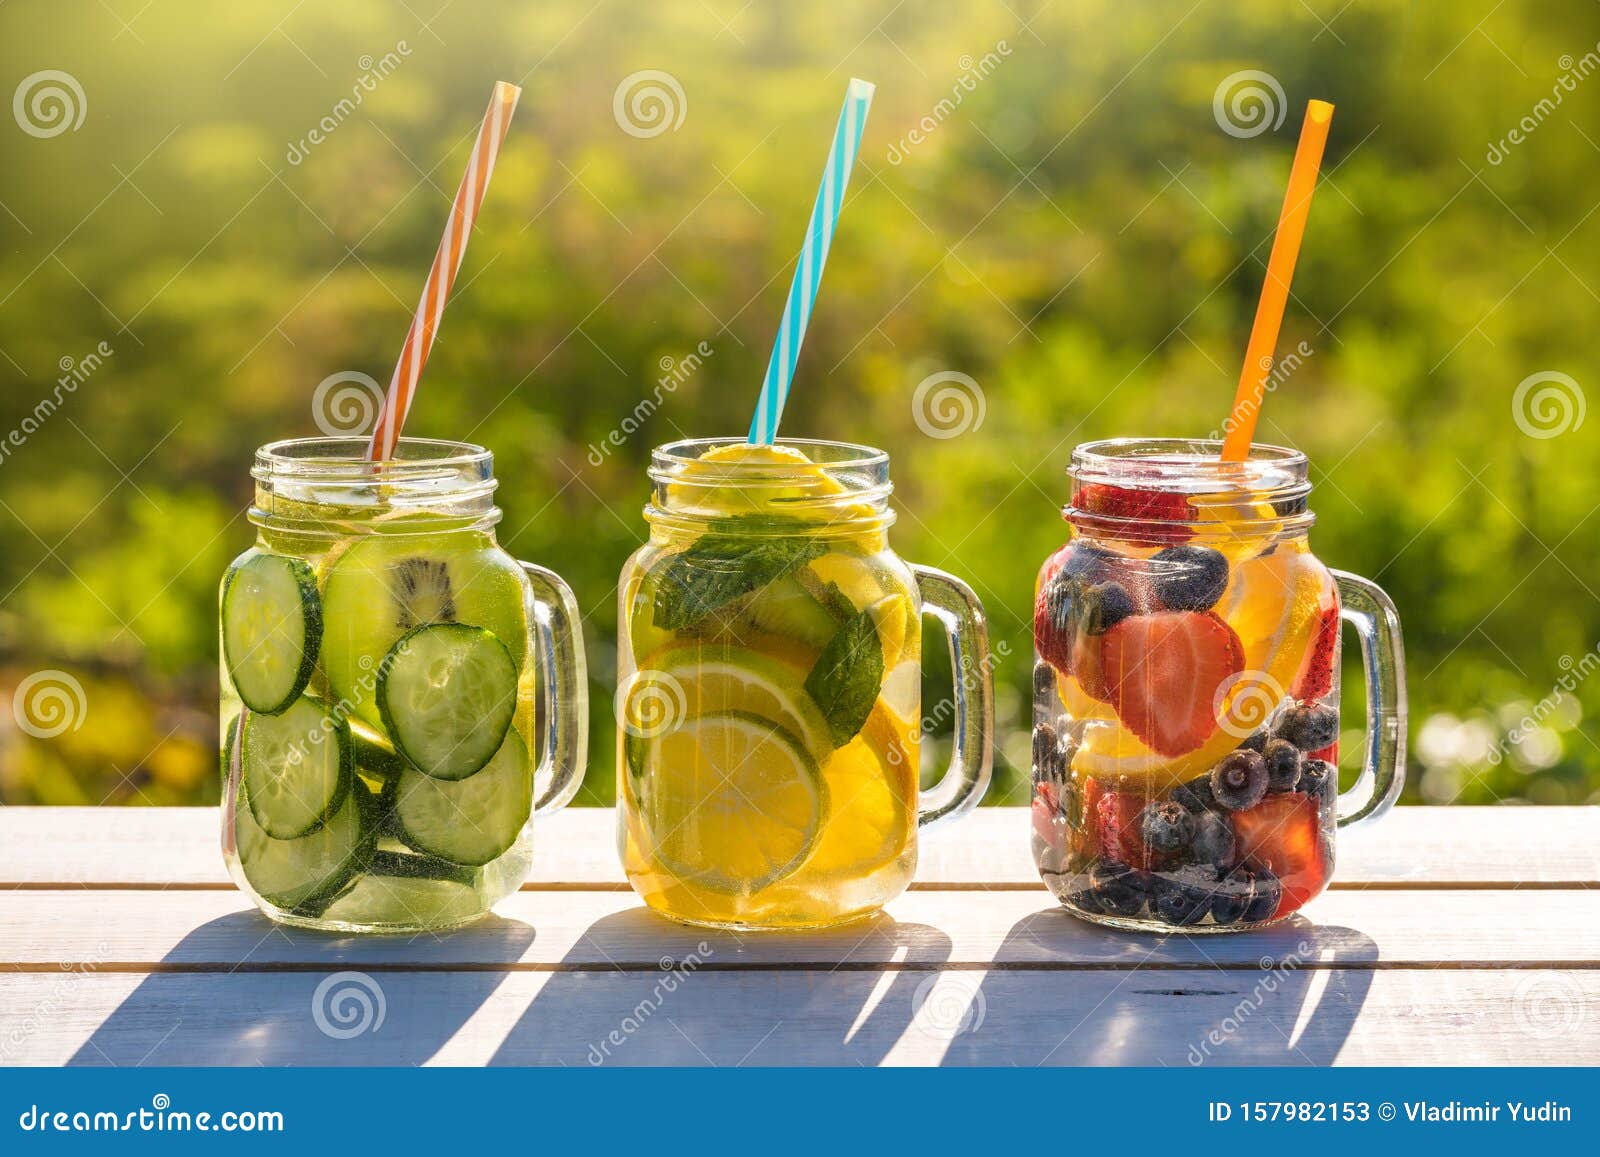 mason jars of infused water with fruits